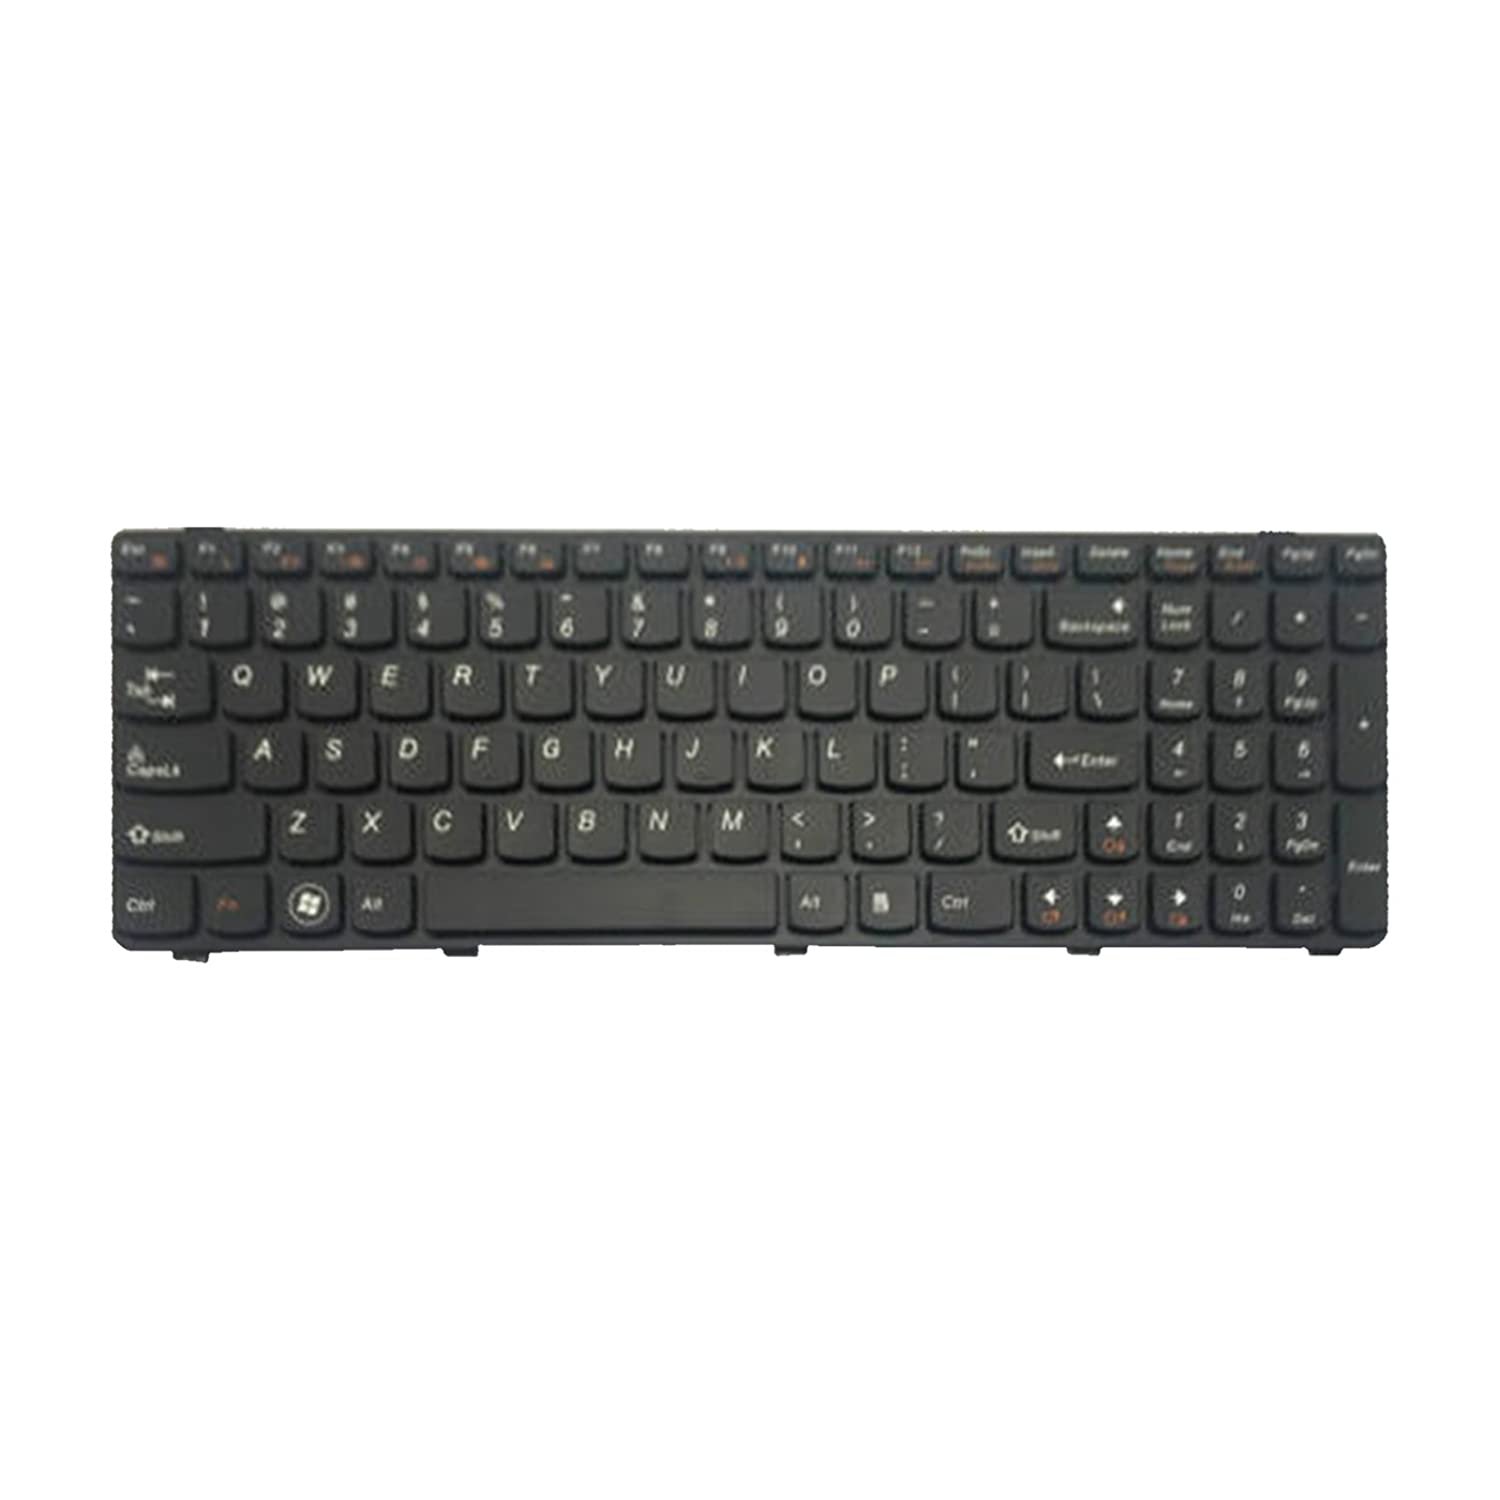 You are currently viewing ACER Laptop Keyboard at Ghatkopar, Mumbai